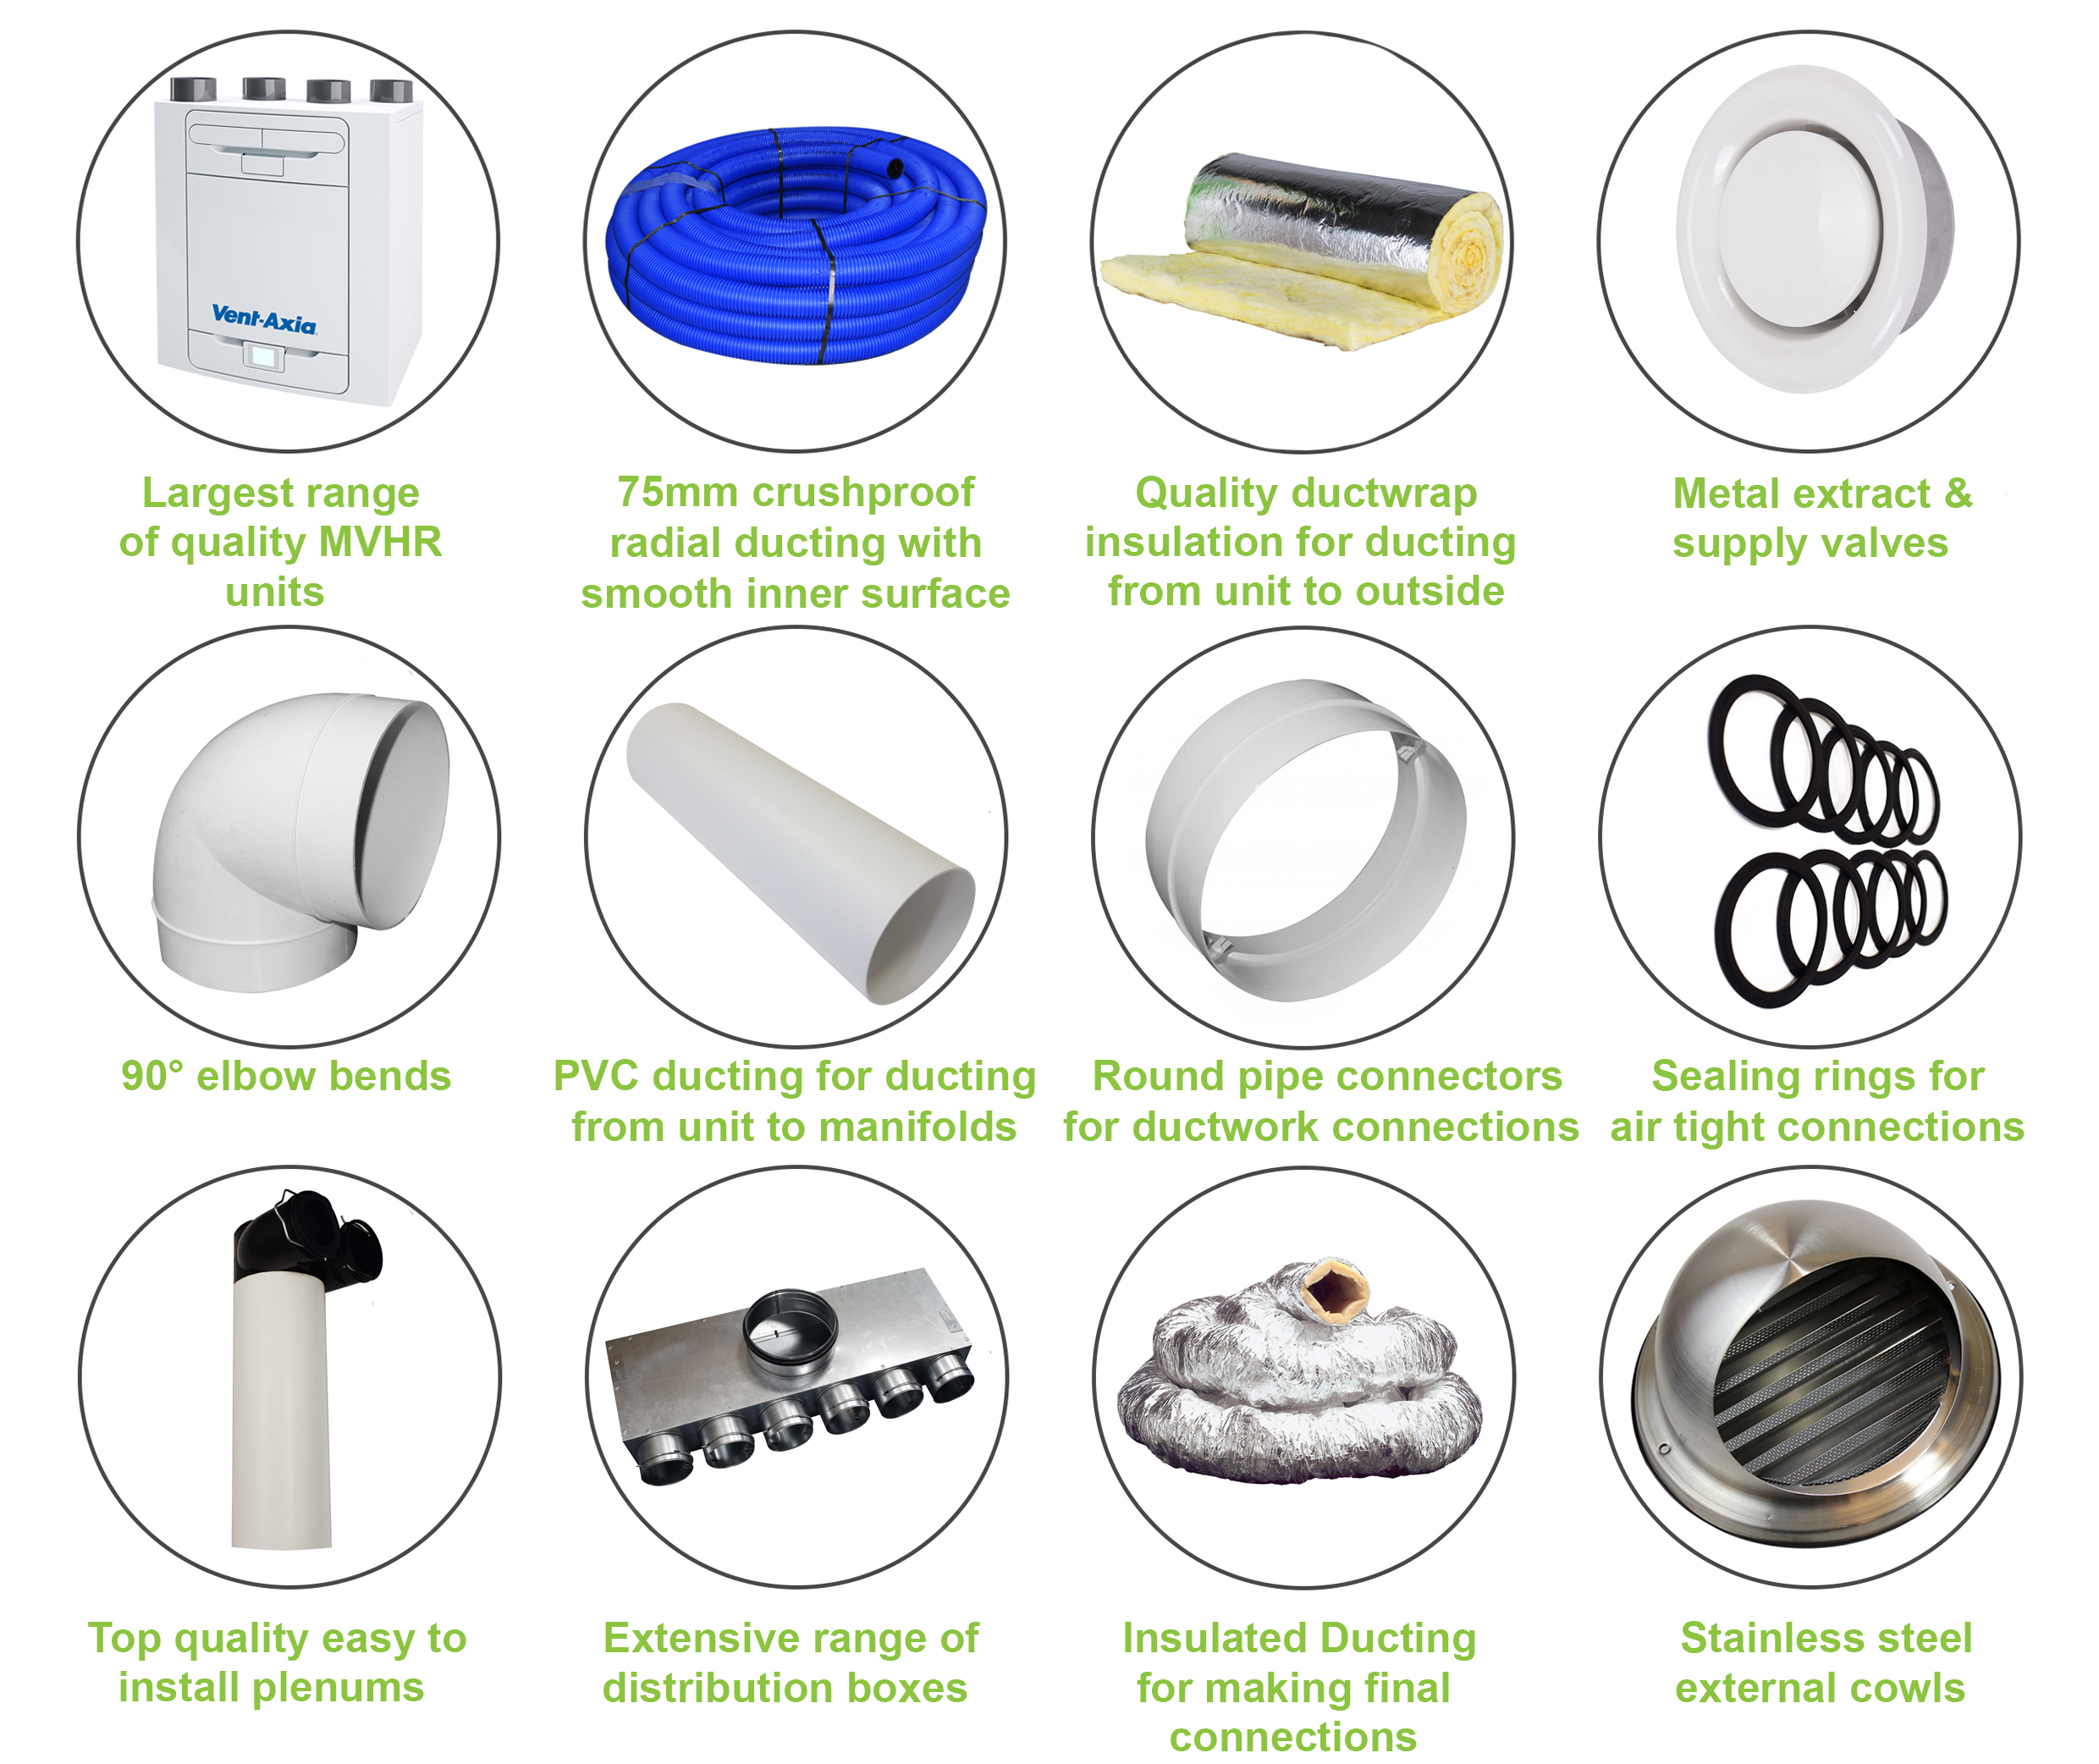 ducting kit contents